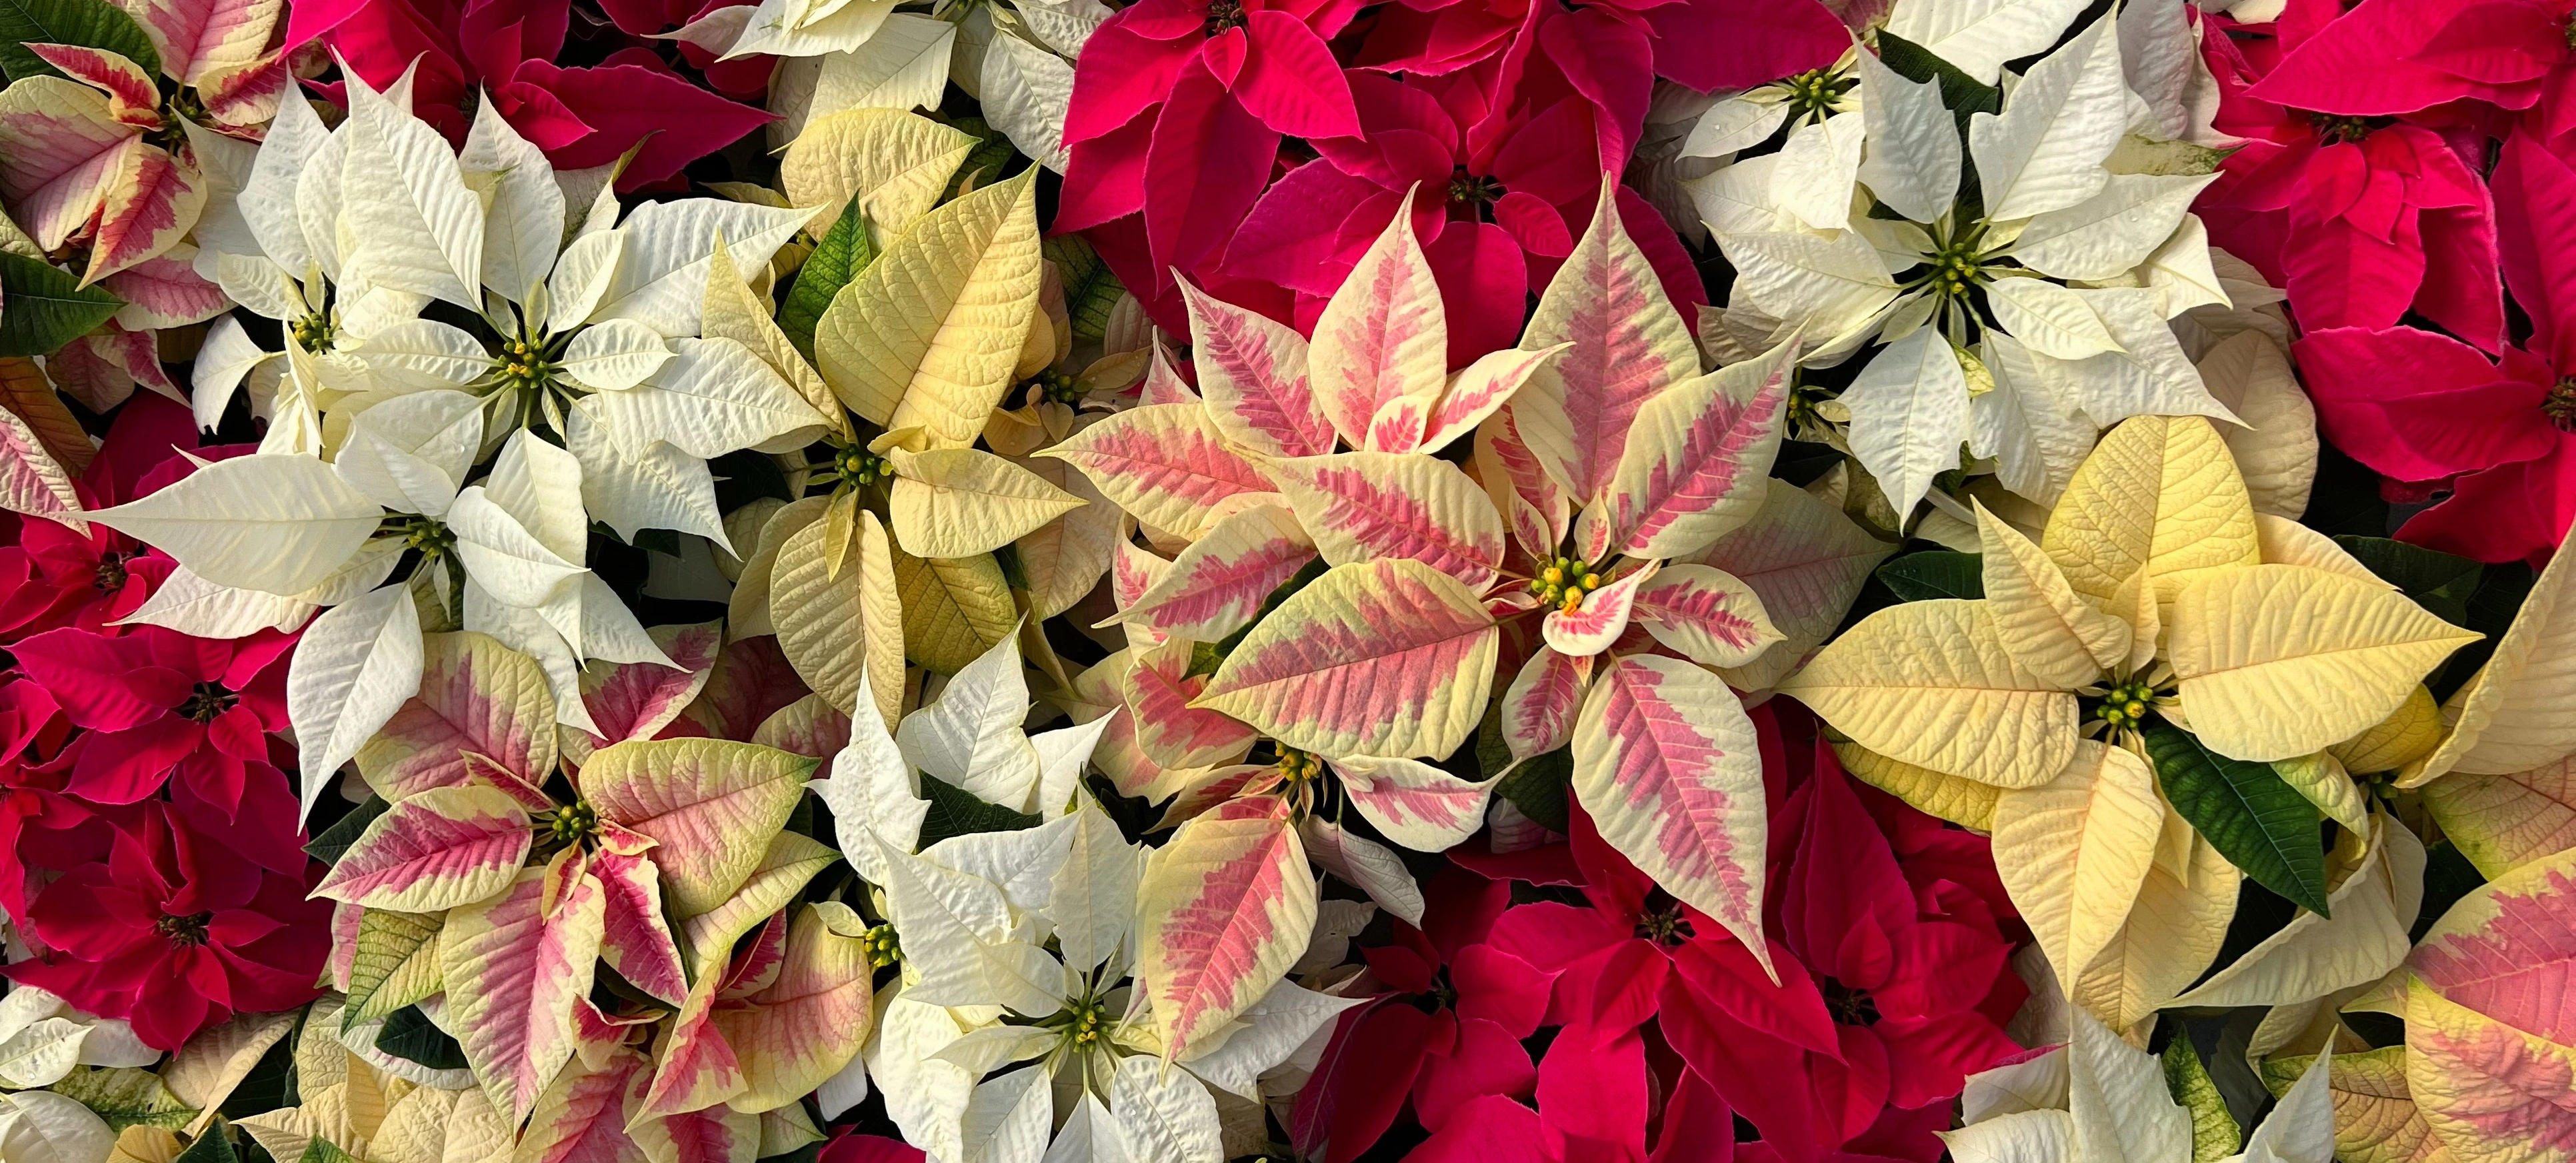 Winter Greenery and Poinsettias at Woldhuis Farms Sunrise Greenhouse